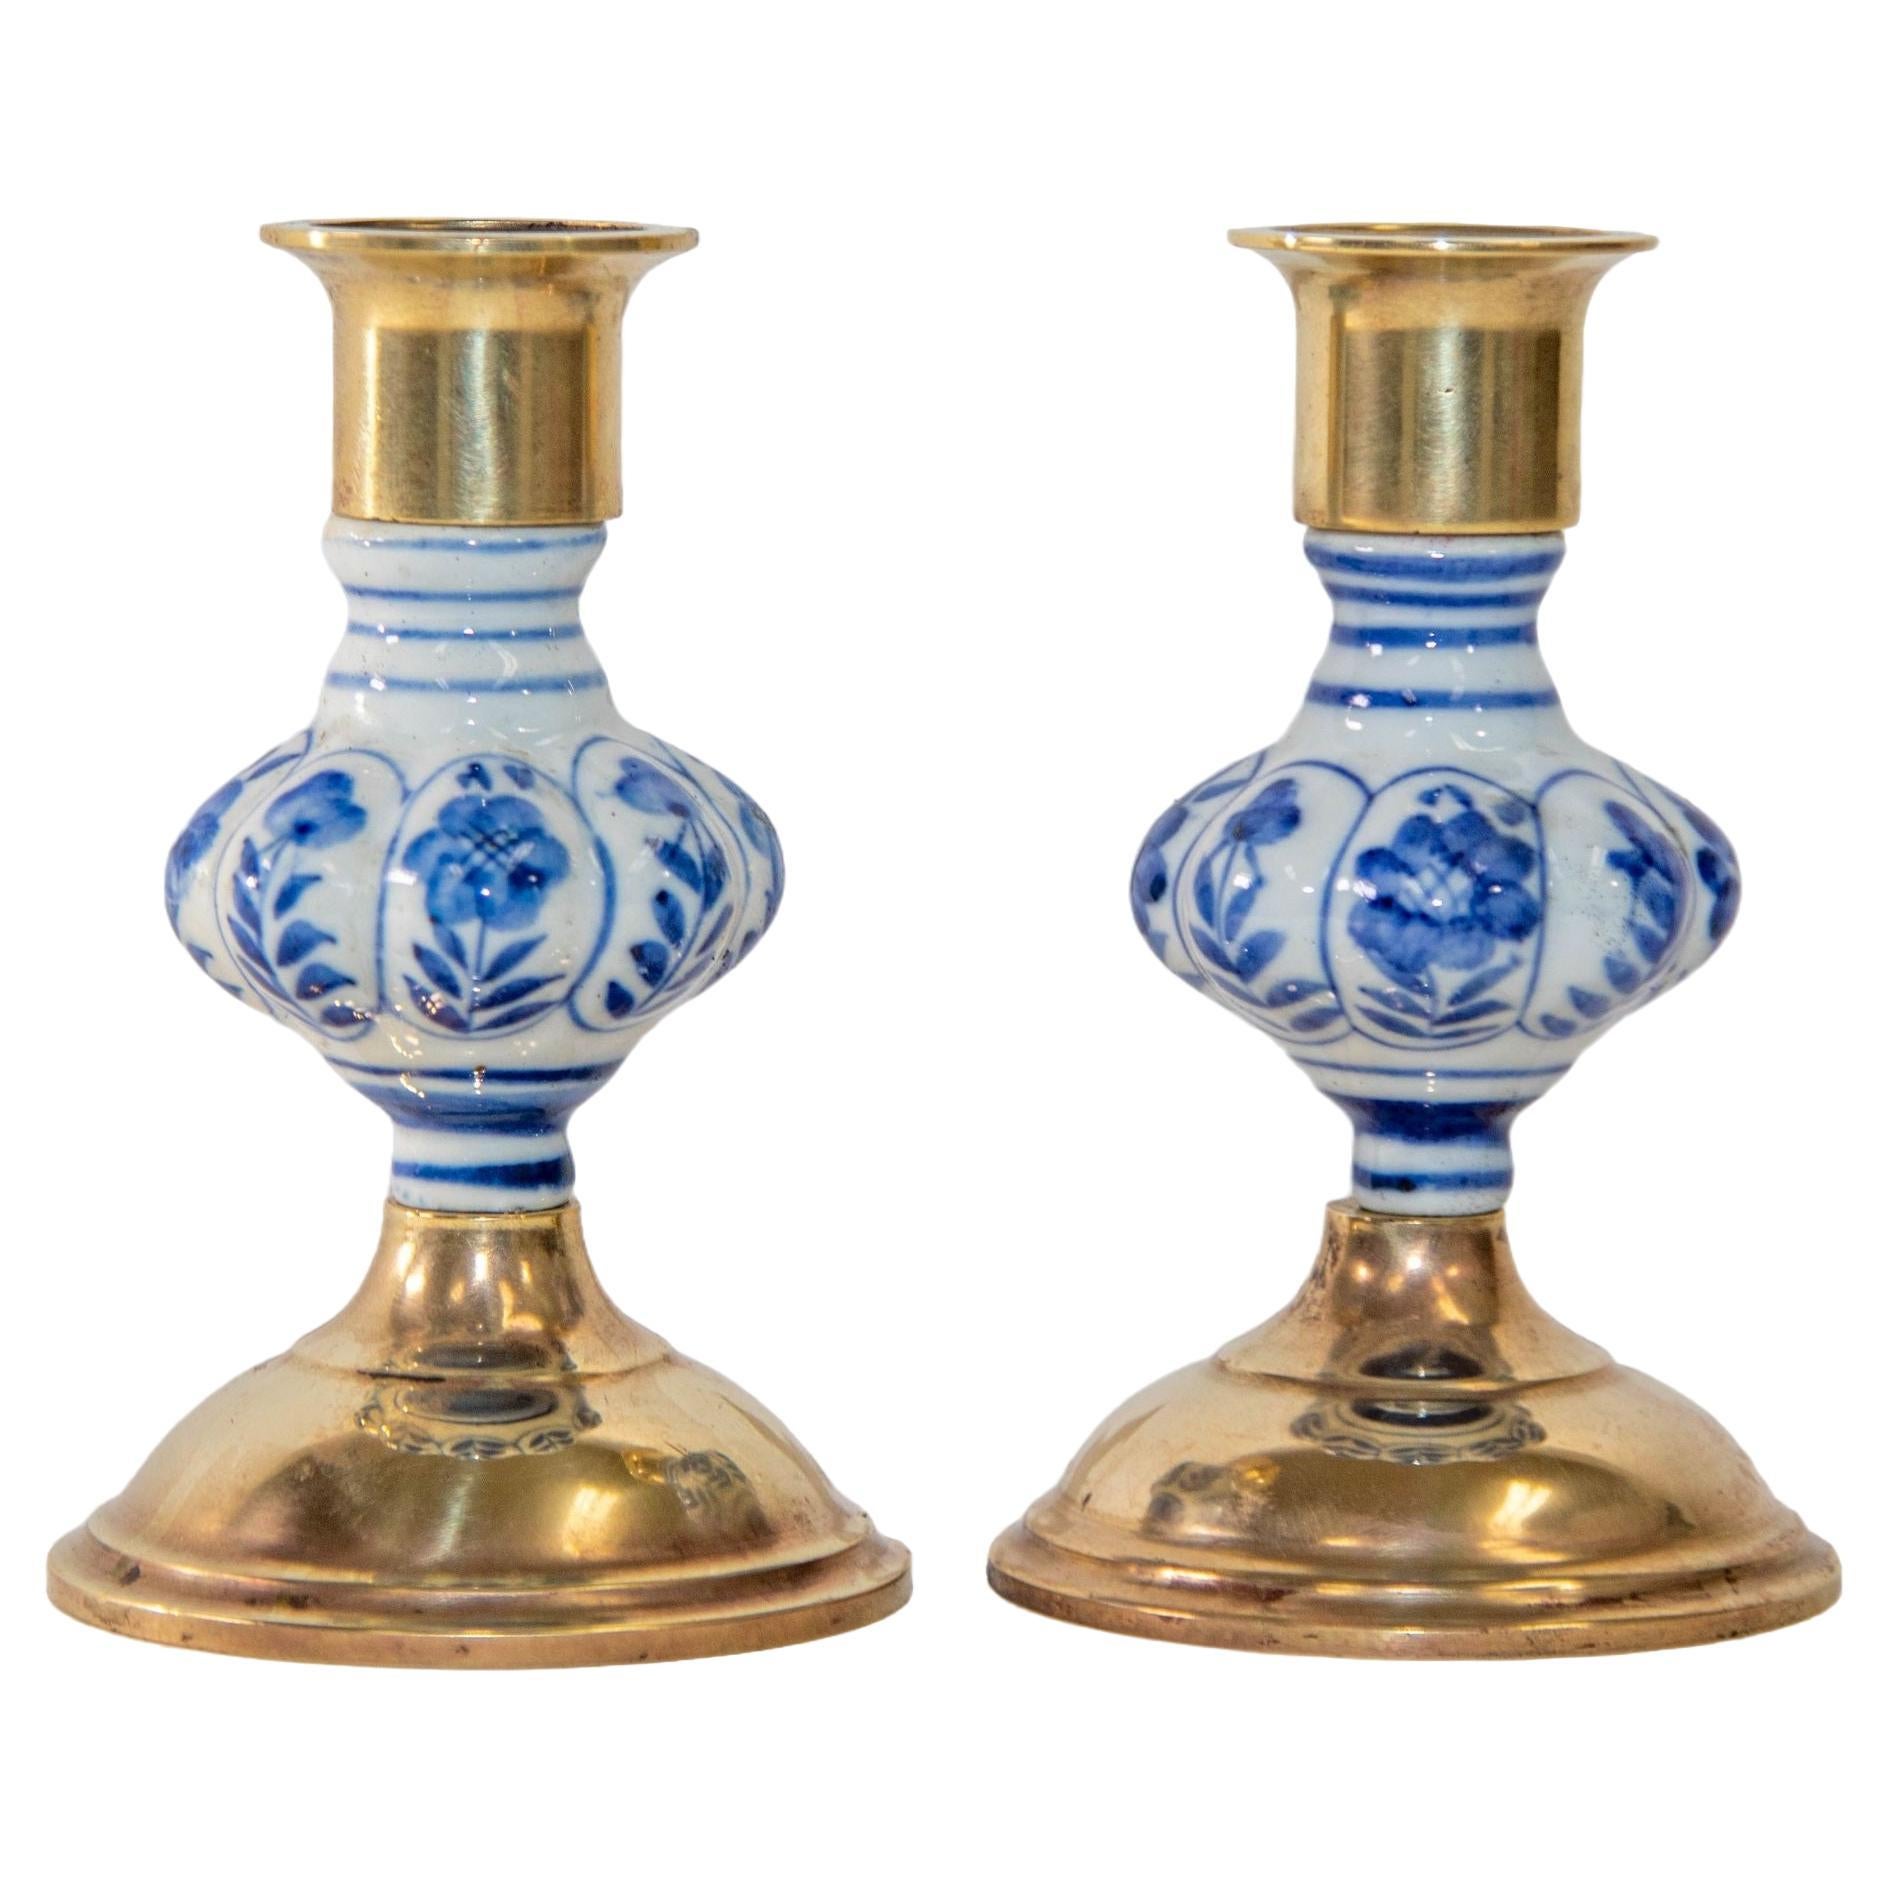 Vintage Delft Floral Blue and White Ceramic and Brass Candlesticks, a Pair 1950s